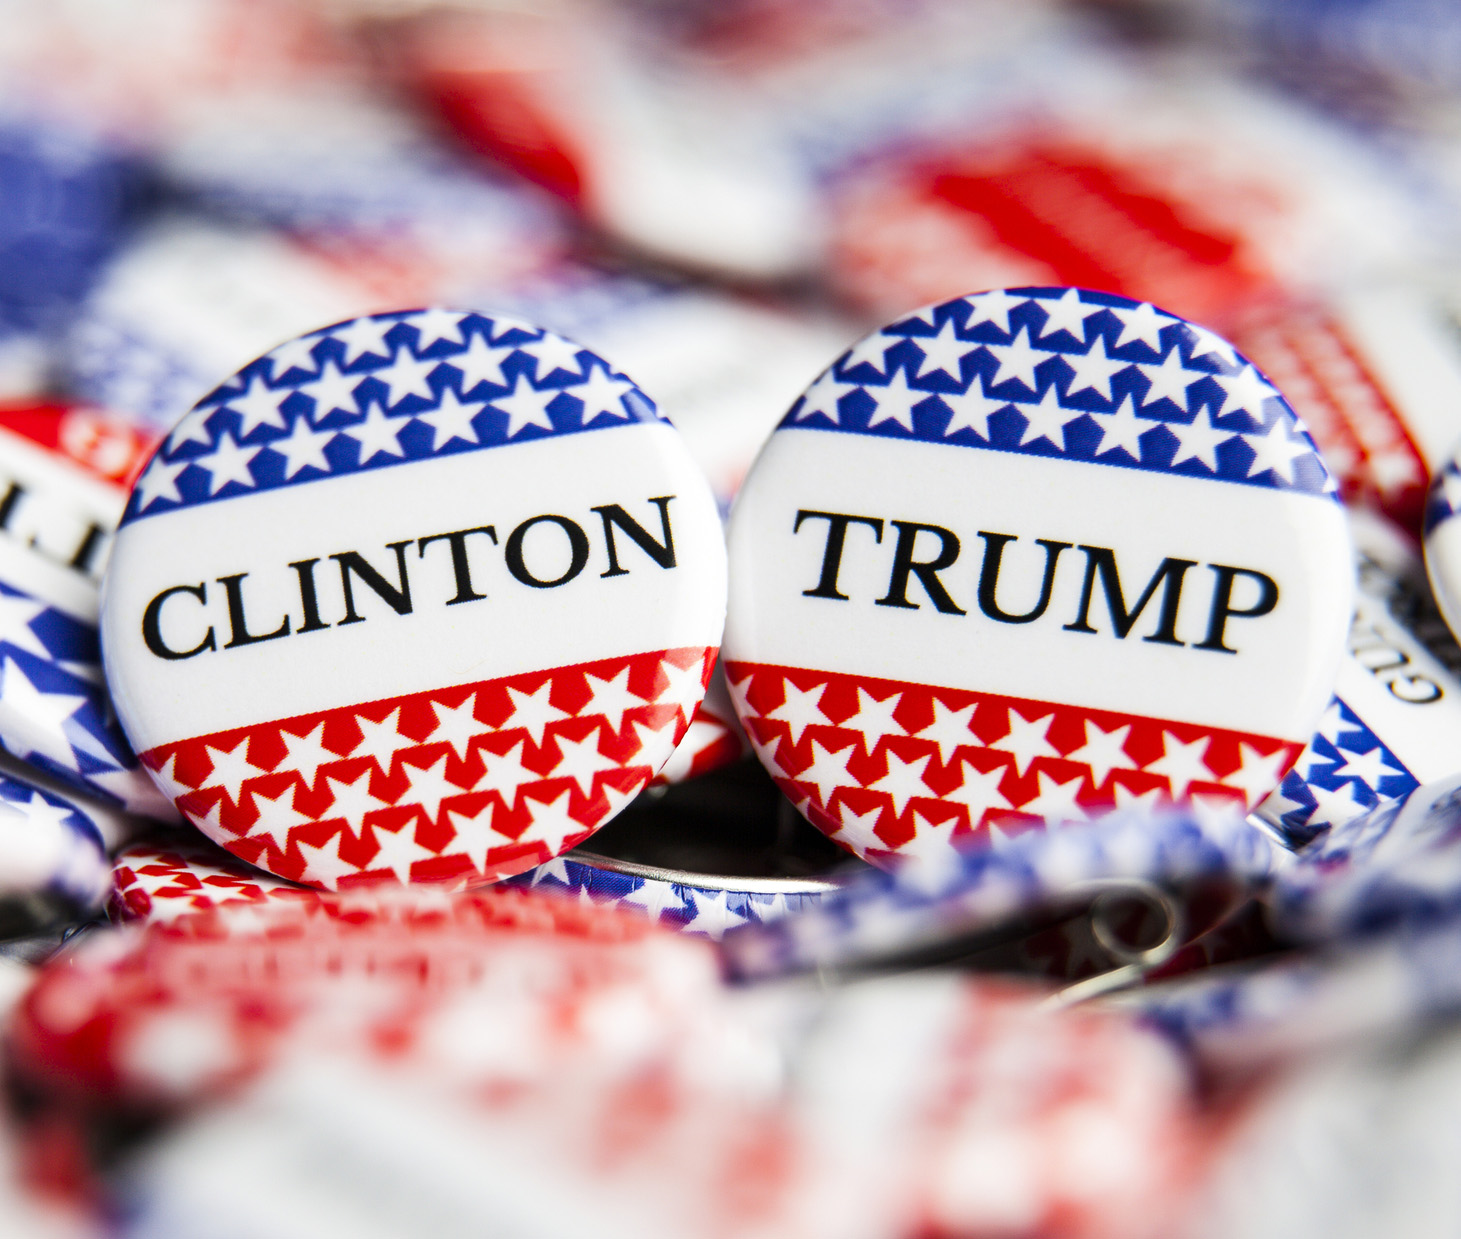 Election vote buttons